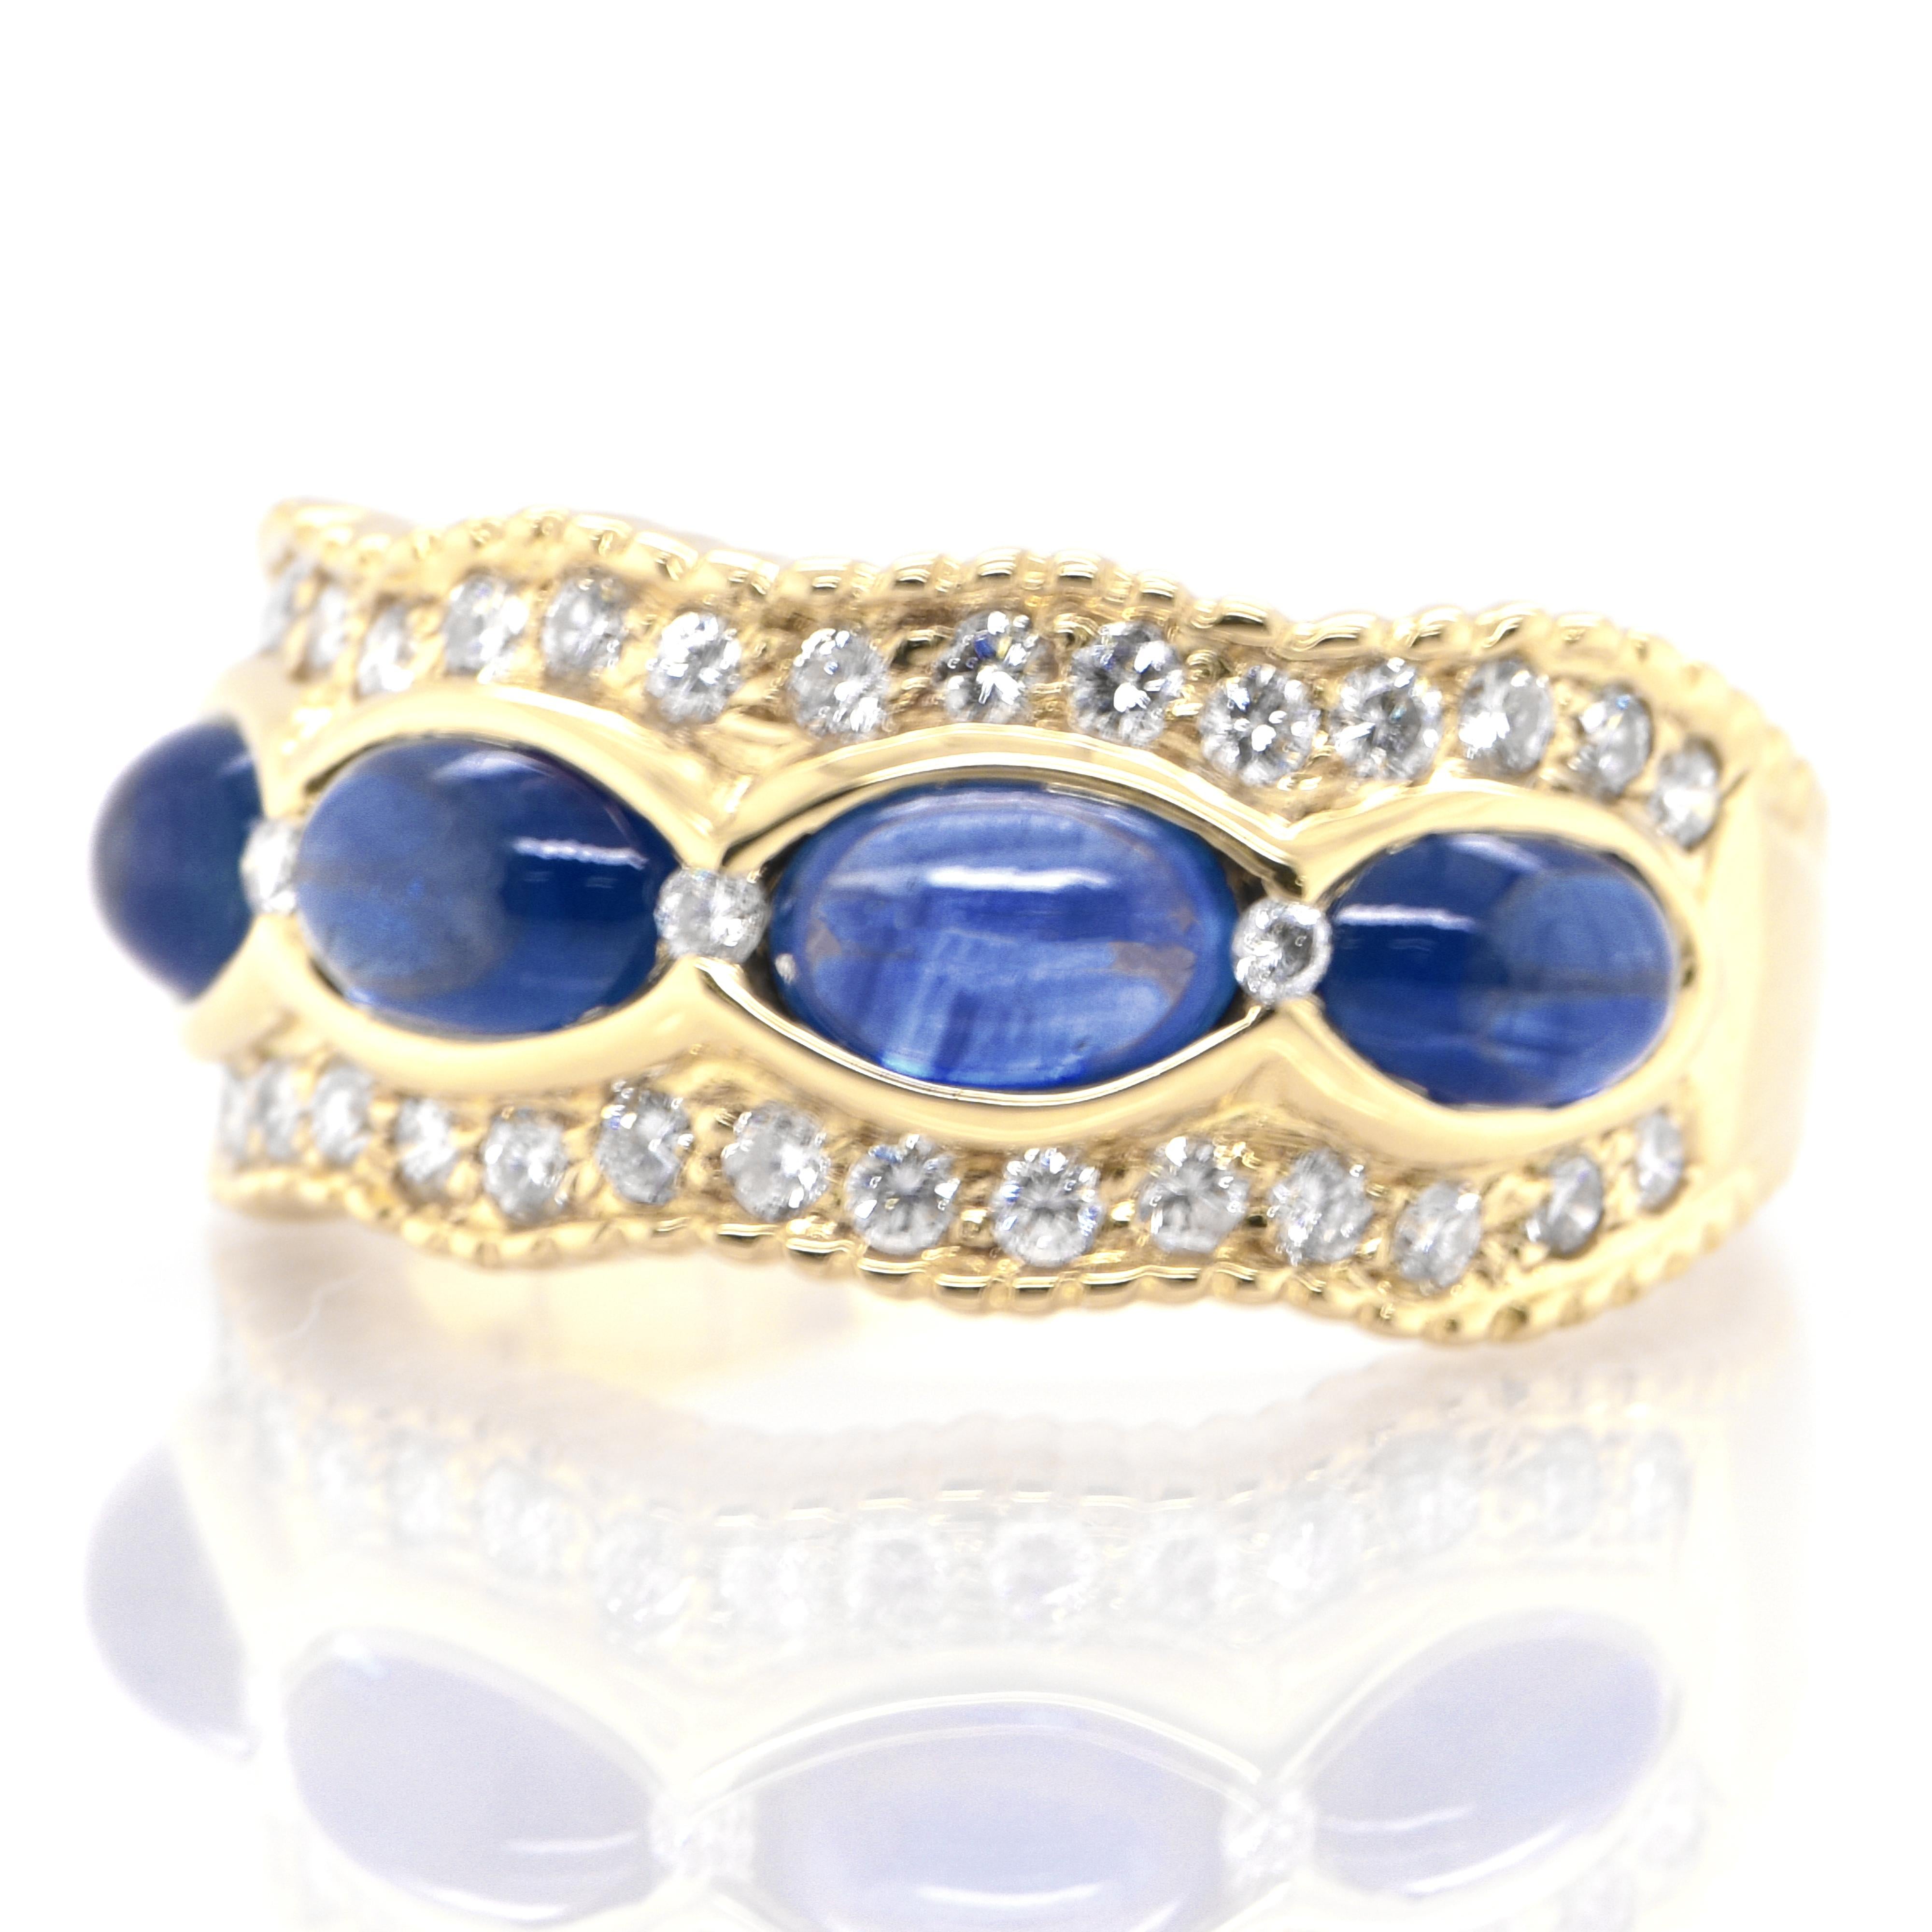 A beautiful half eternity band ring featuring 2.95 Carats Natural Cabochon Sapphires and 0.47 Carats Diamond Accents set in 18K Yellow Gold. Sapphires have extraordinary durability - they excel in hardness as well as toughness and durability making